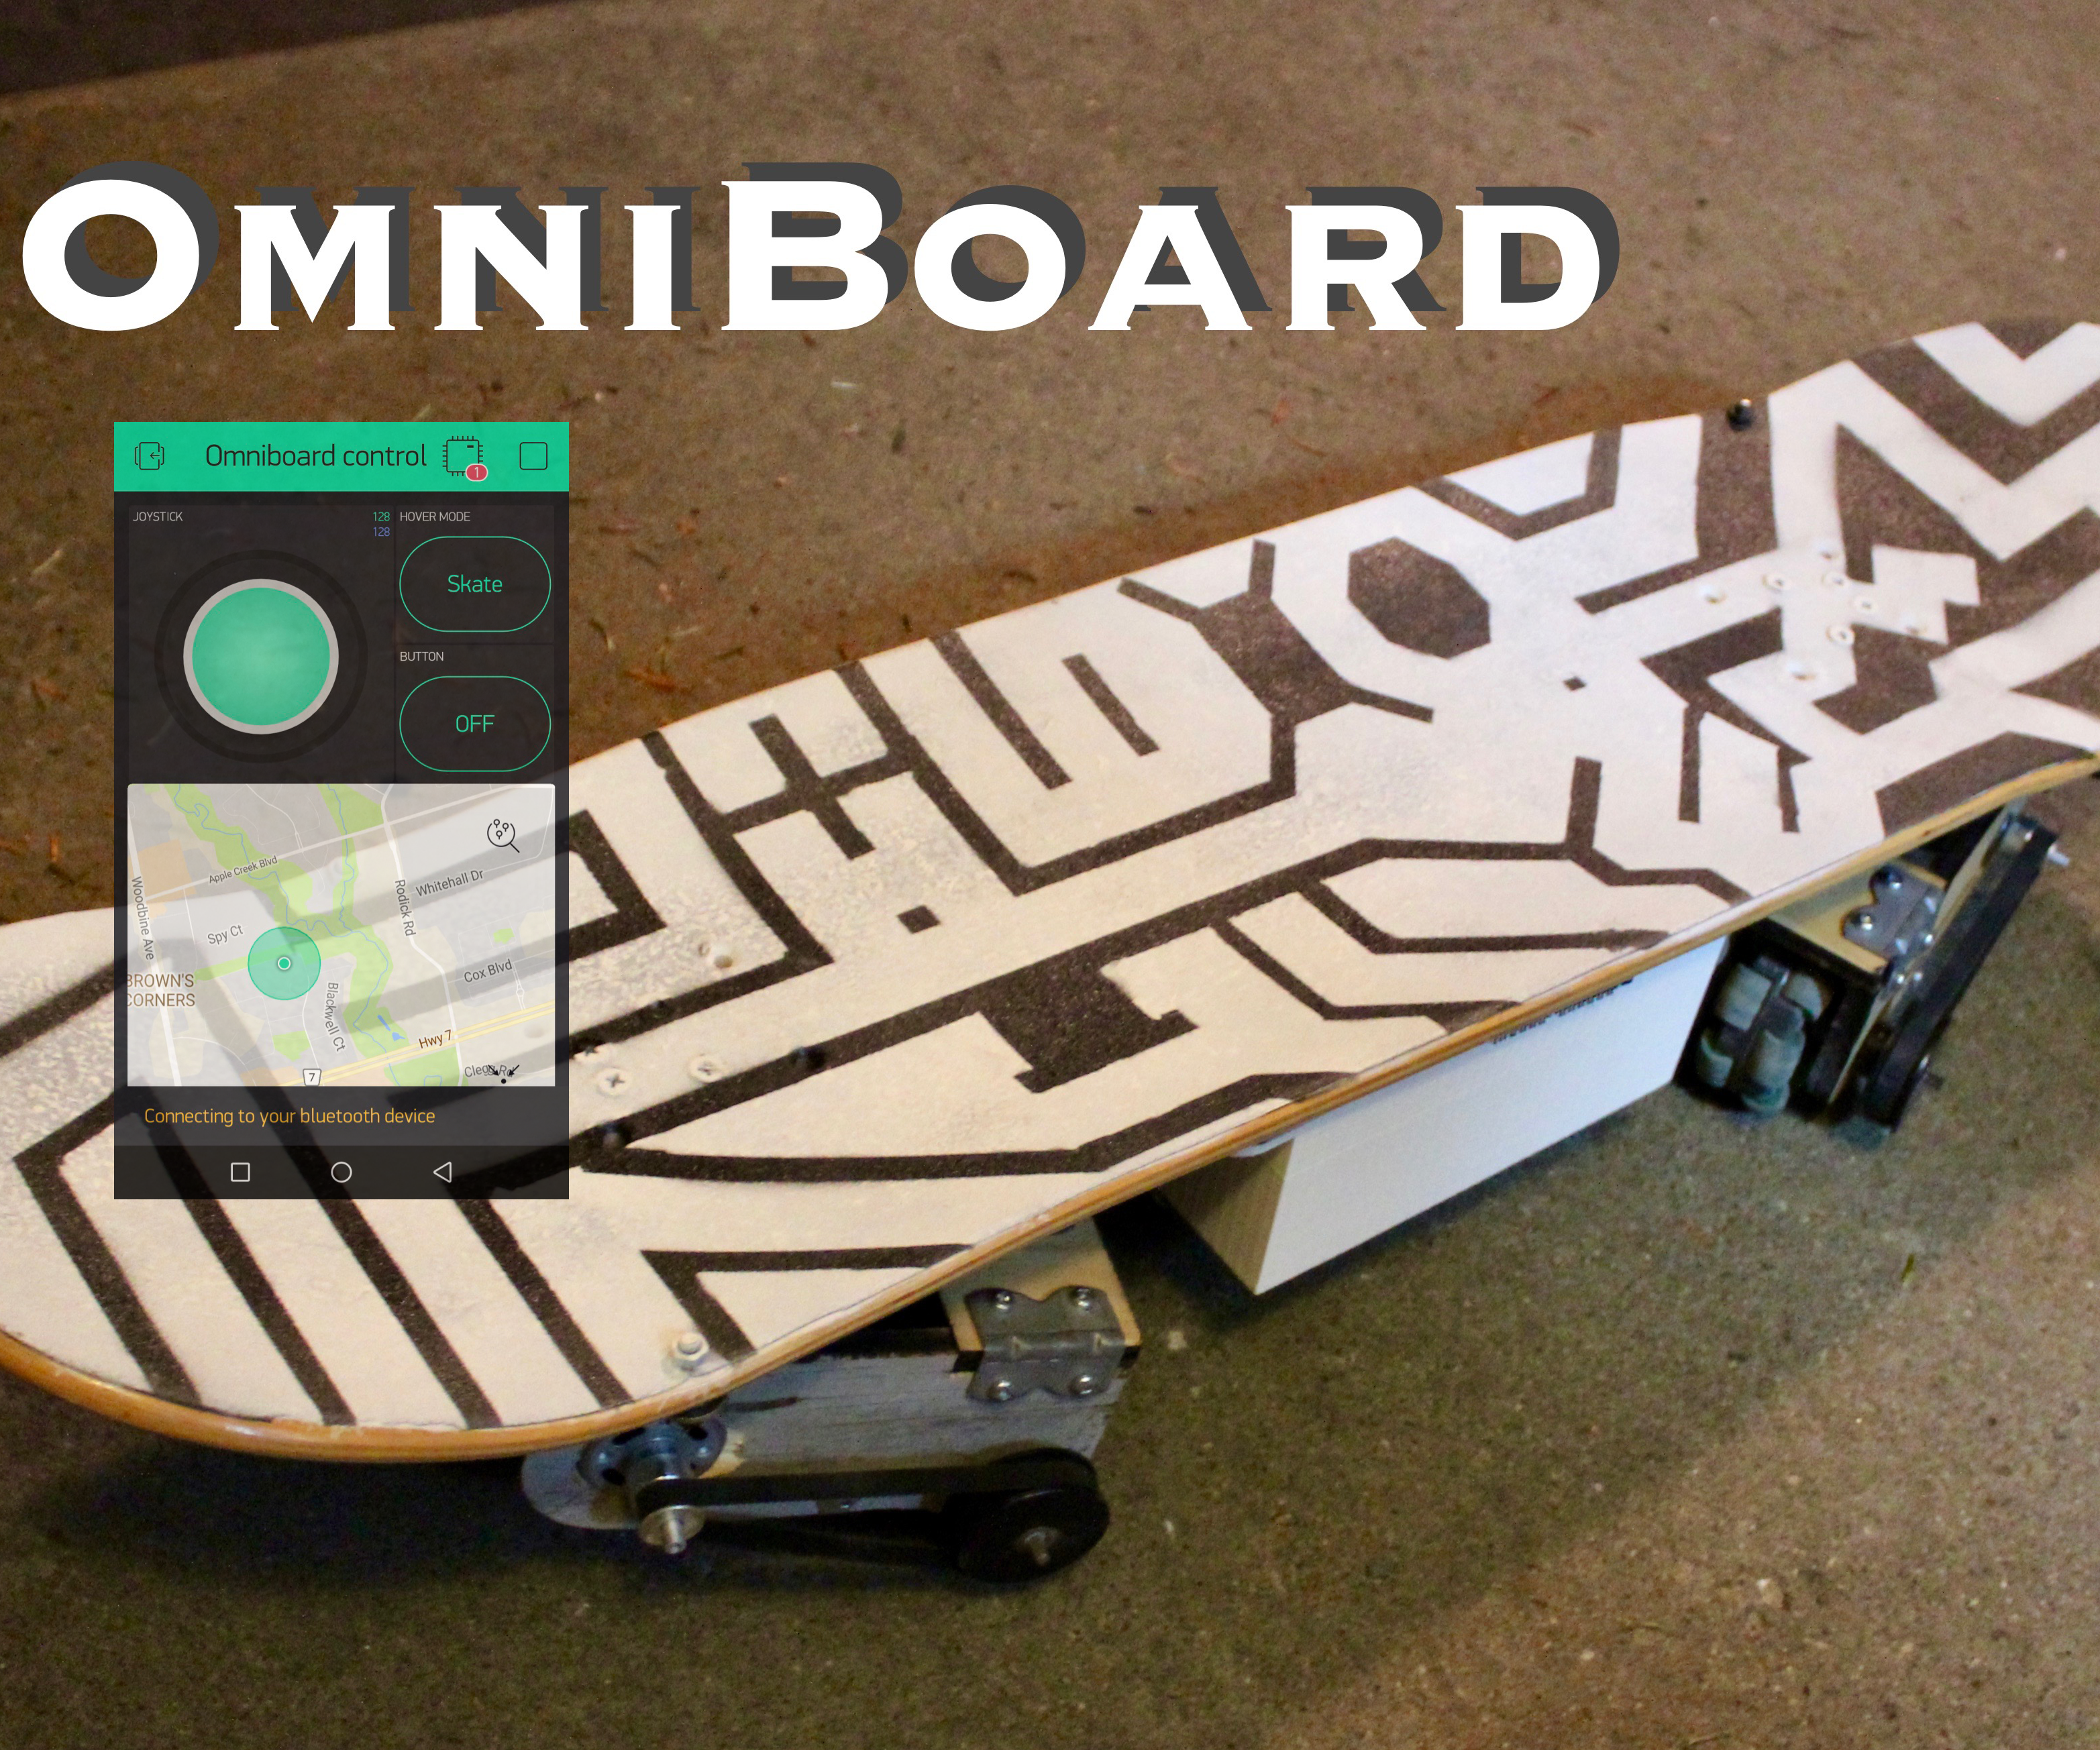 OmniBoard: Skateboard and Hoverboard Hybrid With Bluetooth Control